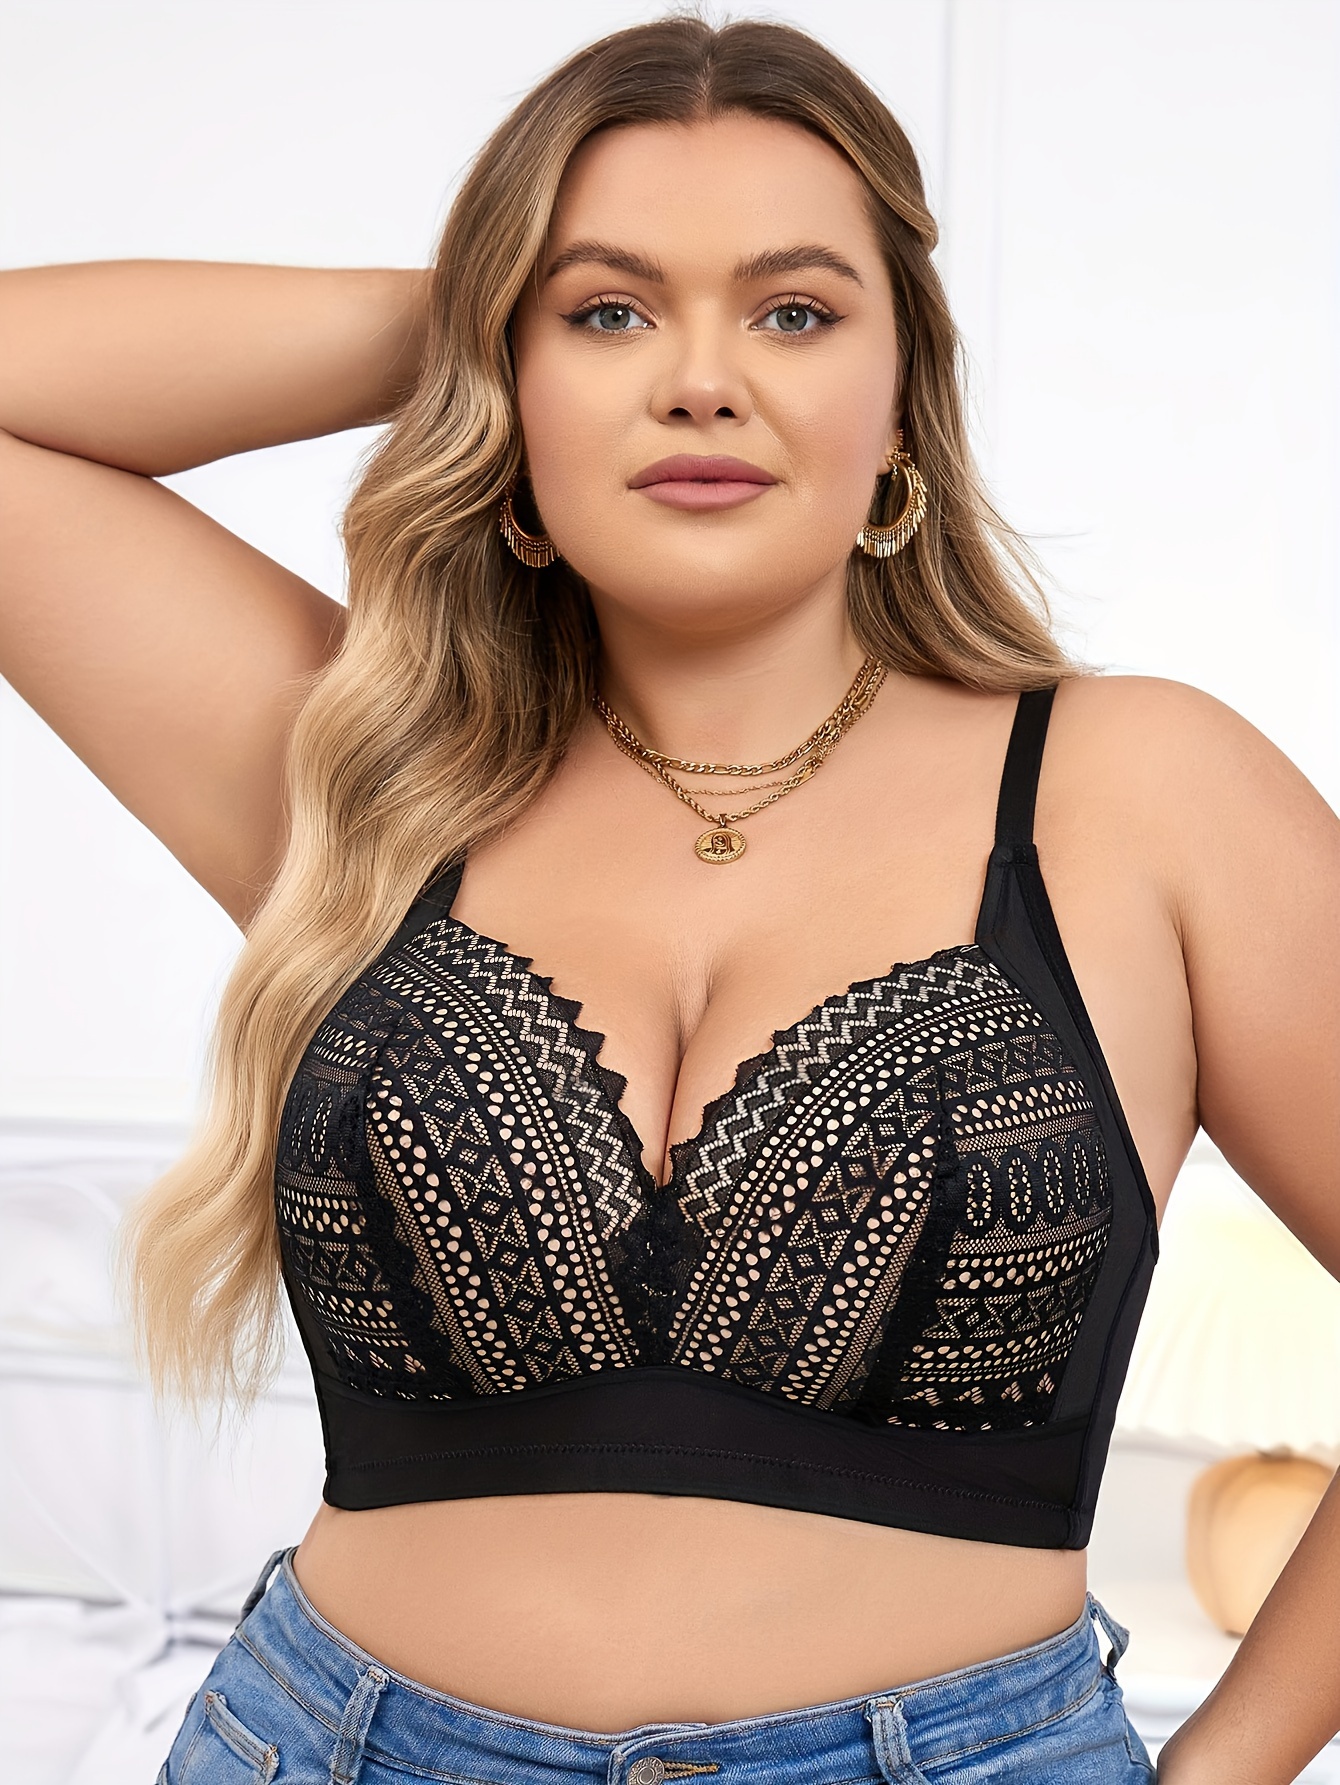 COMVALUE Bralettes for Women Sexy,Womens Plus Size Underwire